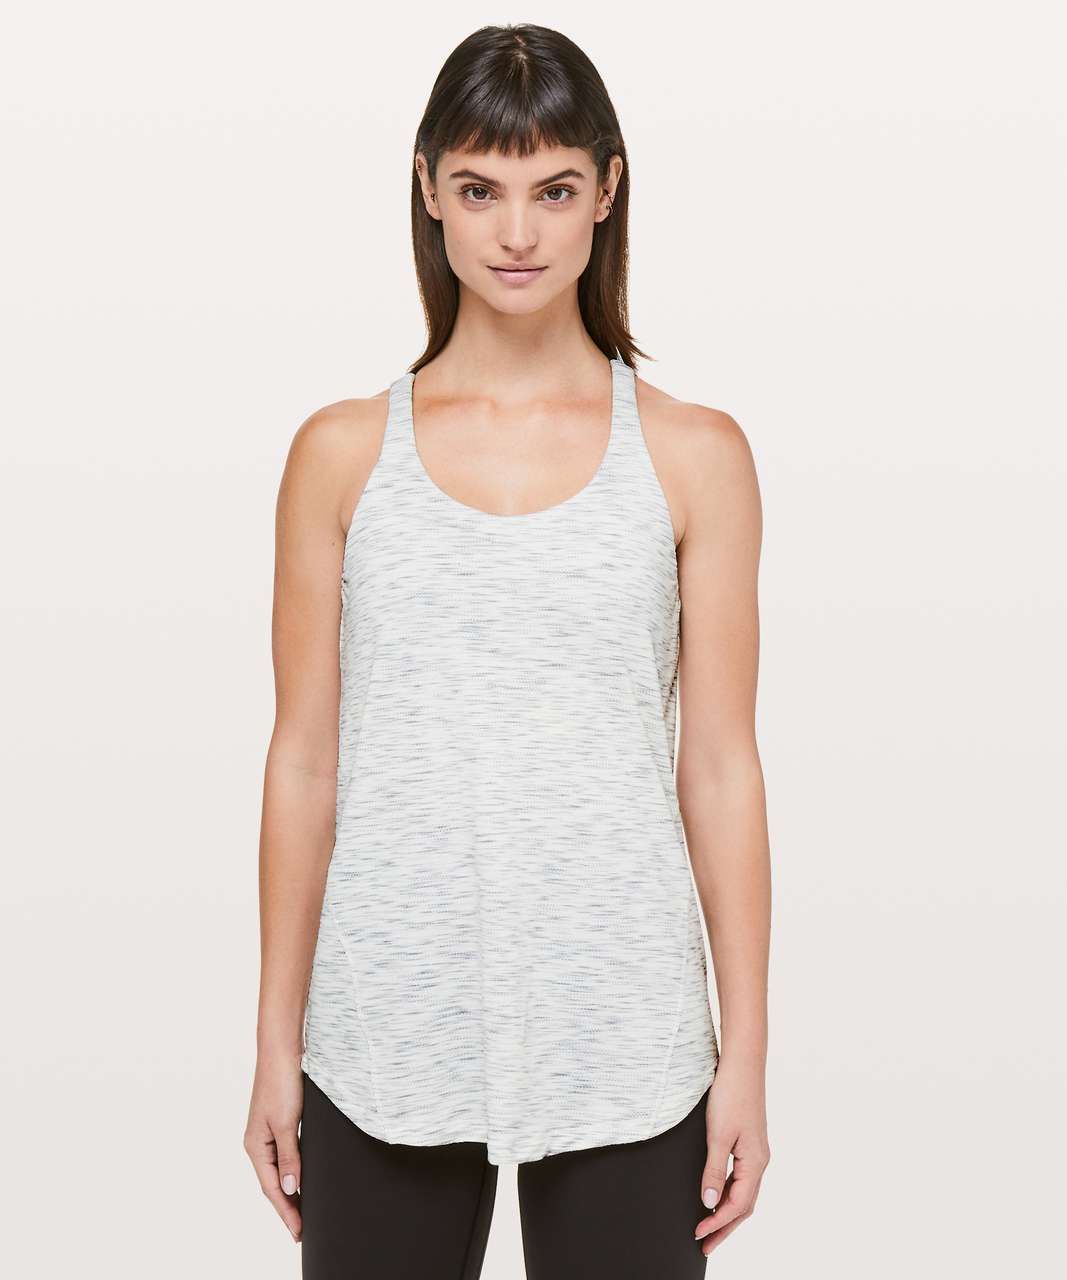 Lululemon Moment To Movement 2-In-1 Tank - Tiger Space Dye Hail White / Black